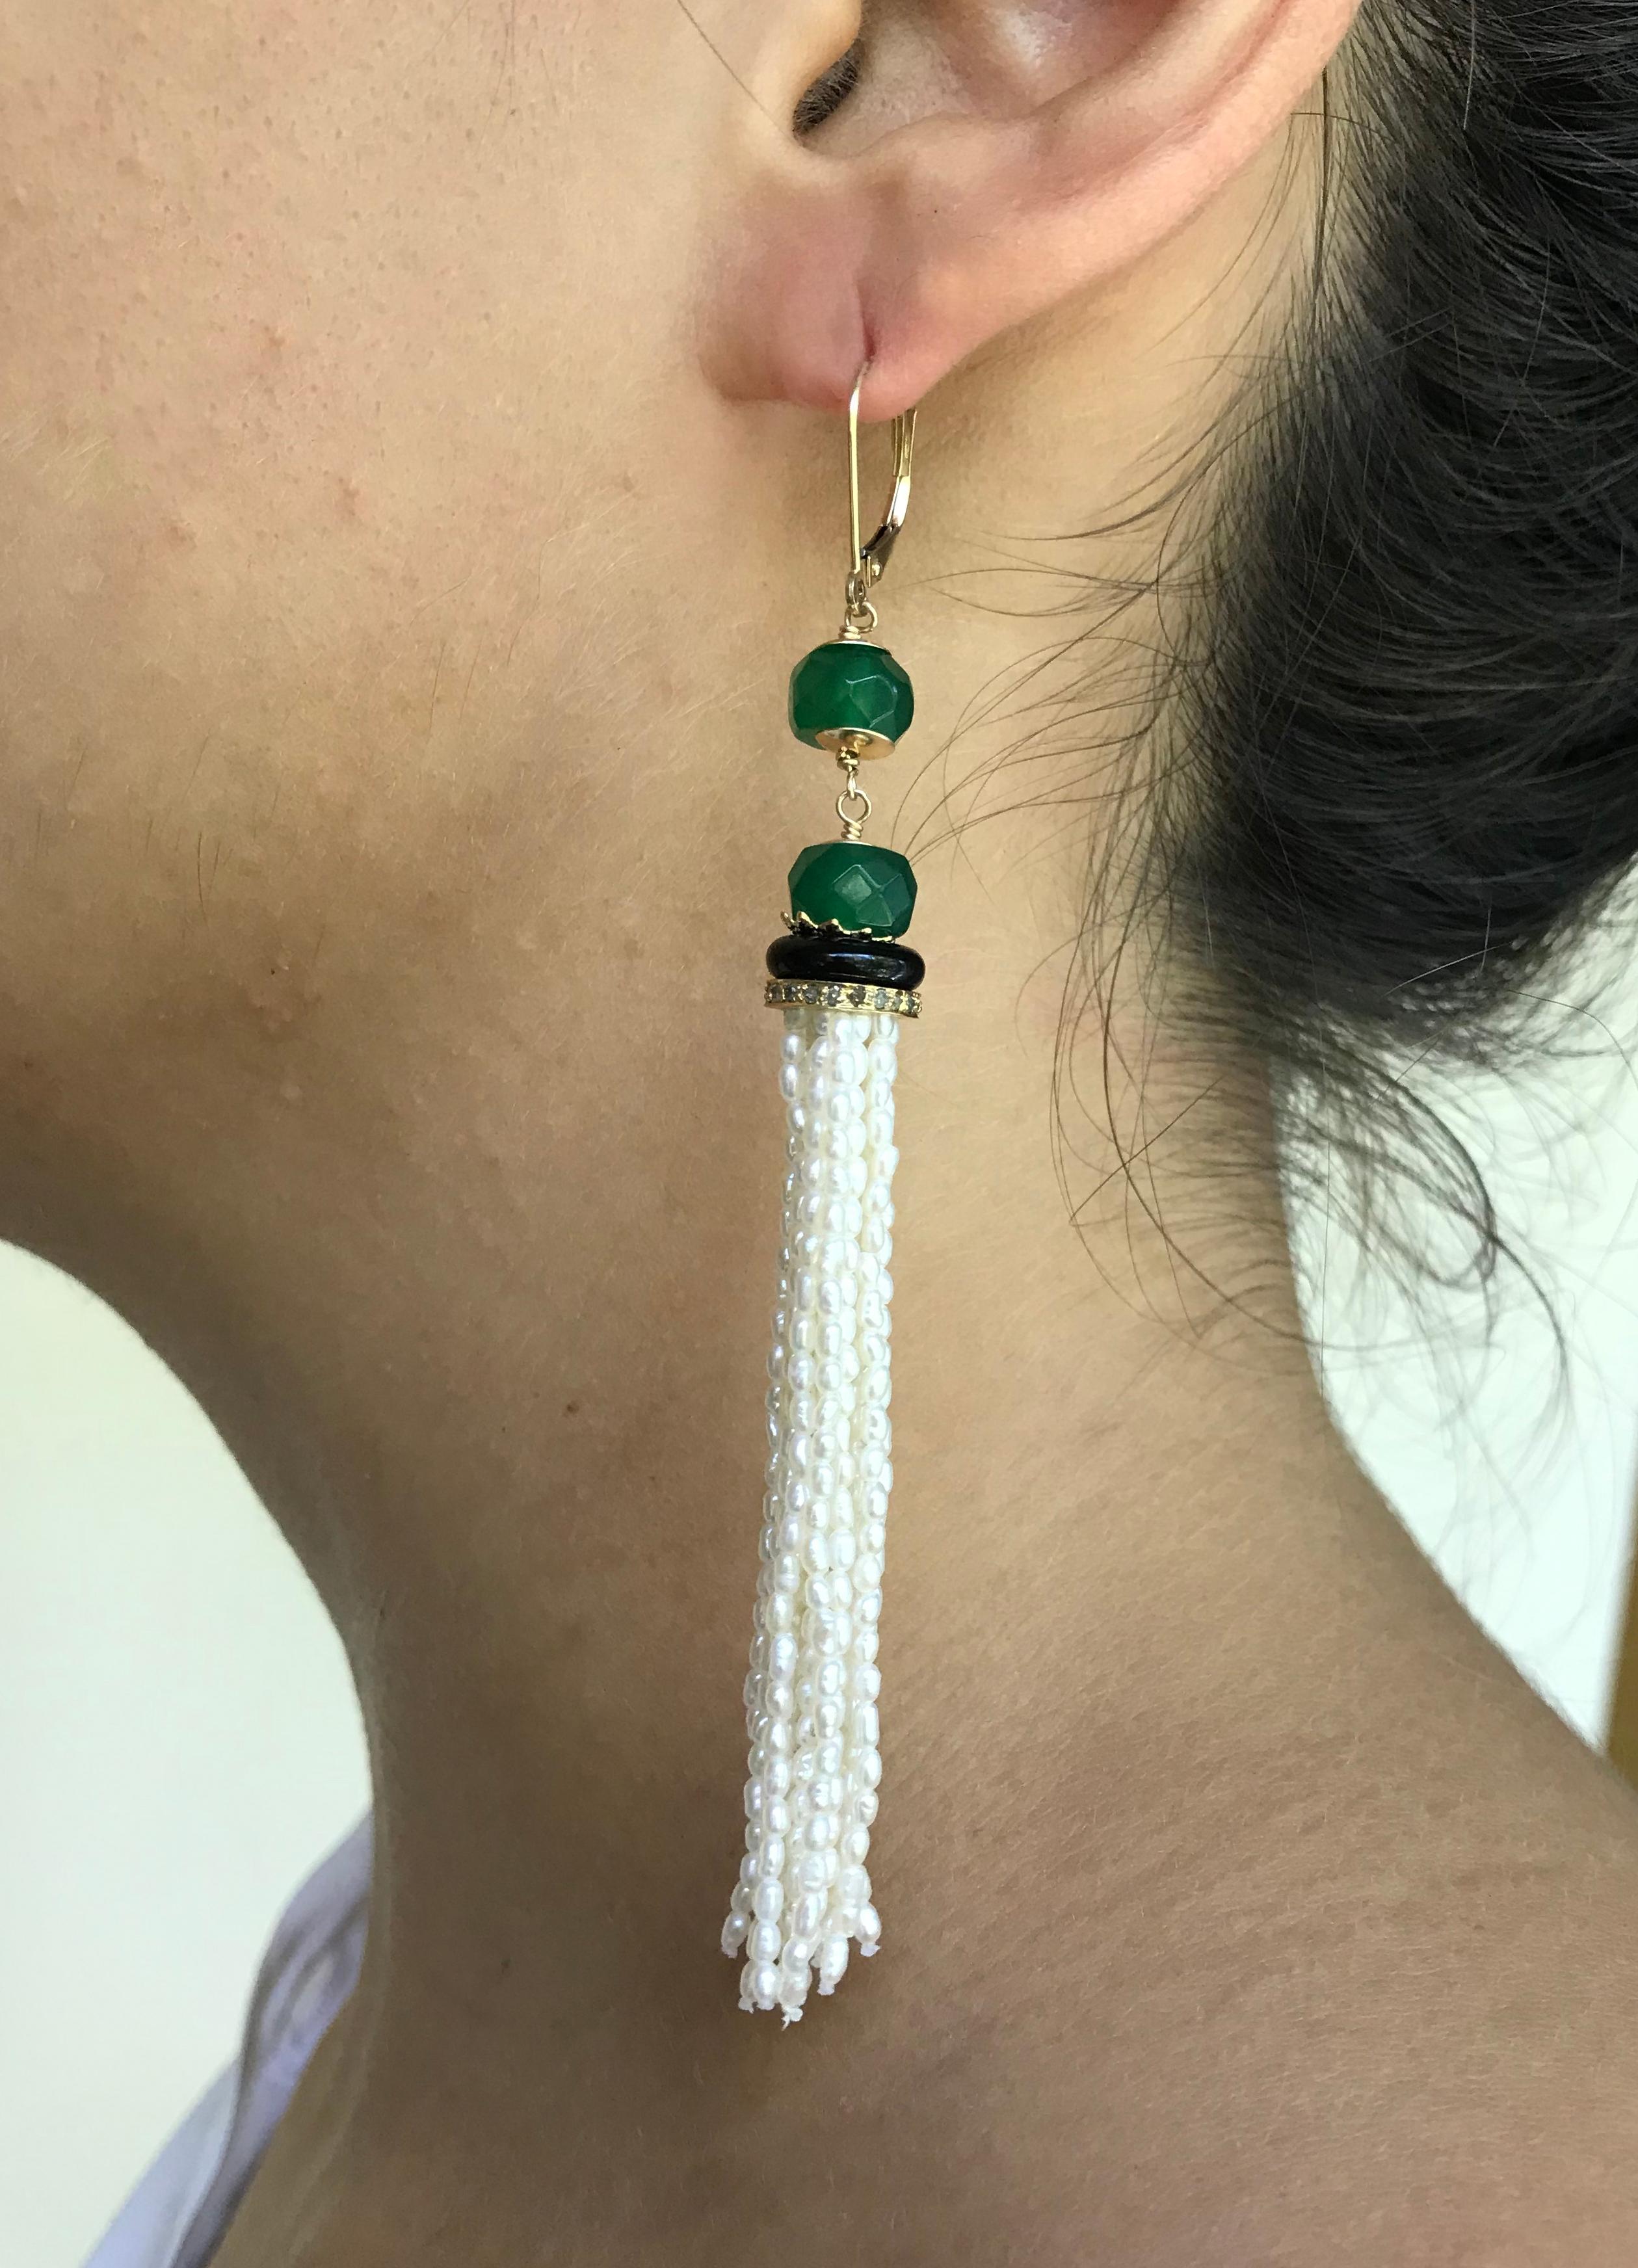 These beautiful Art Deco pearl, green and black onyx beaded with 14k yellow gold lever back and diamond-encrusted roundel earrings are stunning. They are beautifully handcrafted by Marina J. using a vibrant round green and black onyx stone nestled